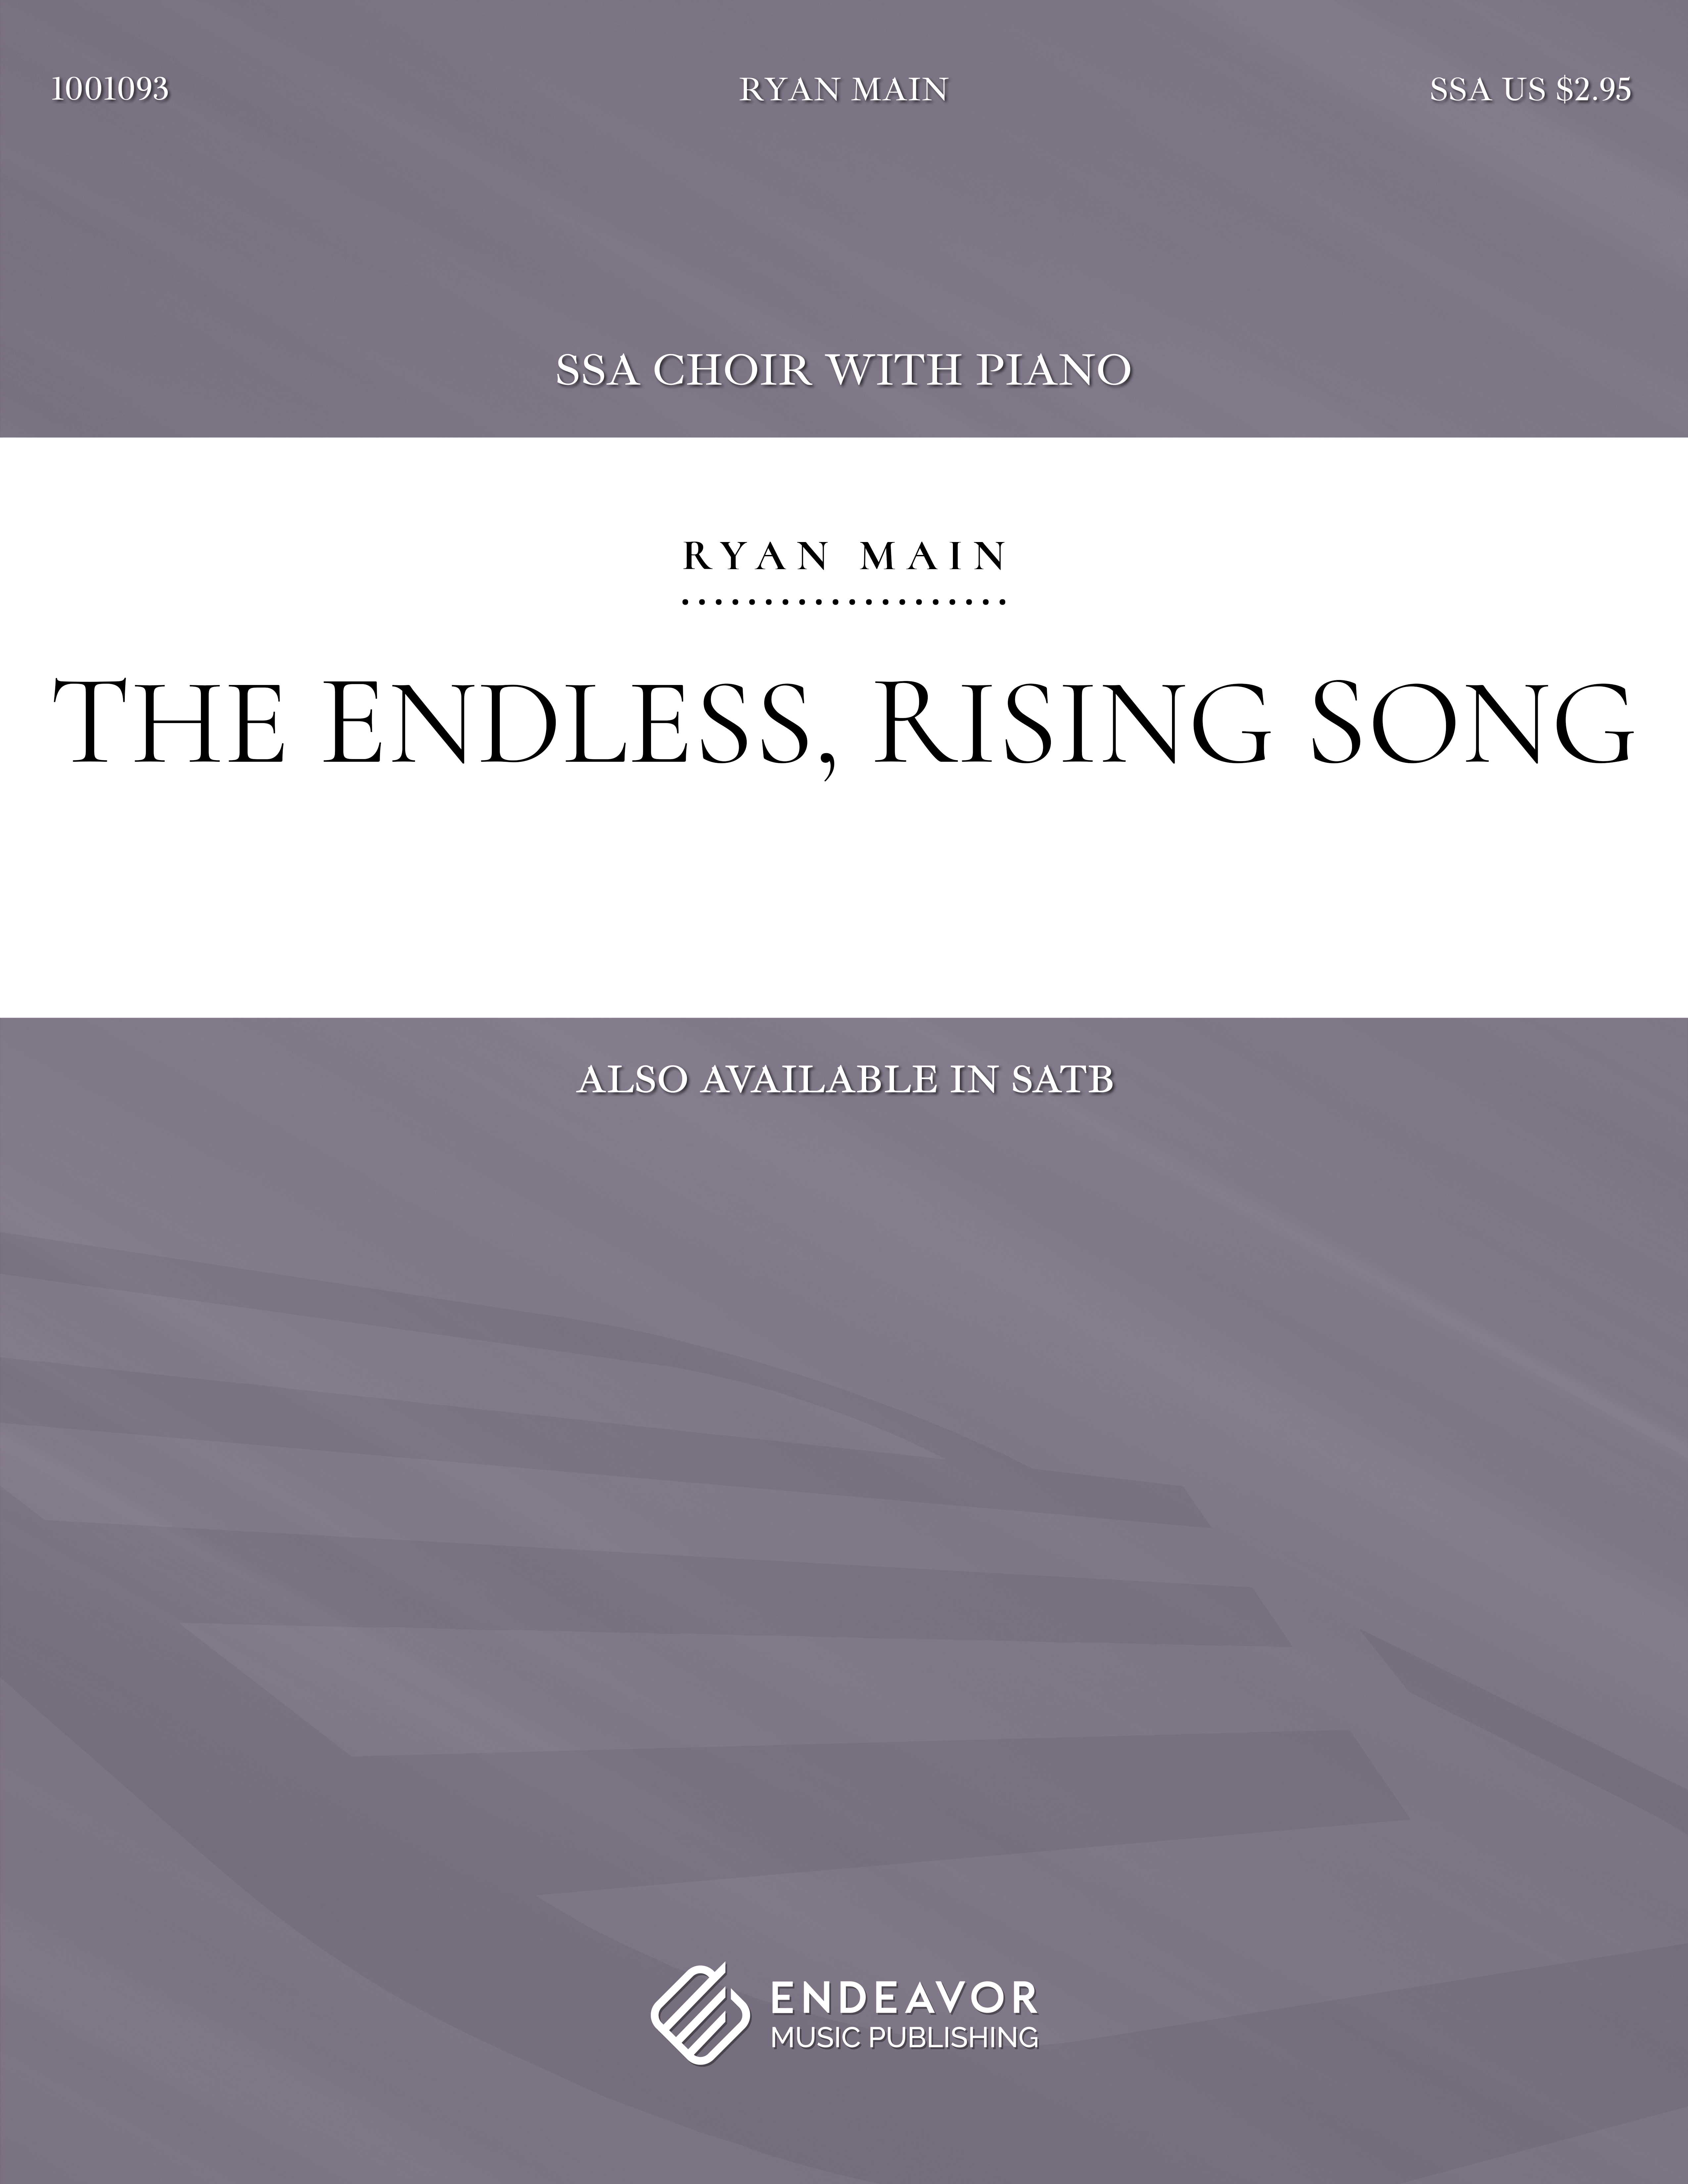 The Endless, Rising Song